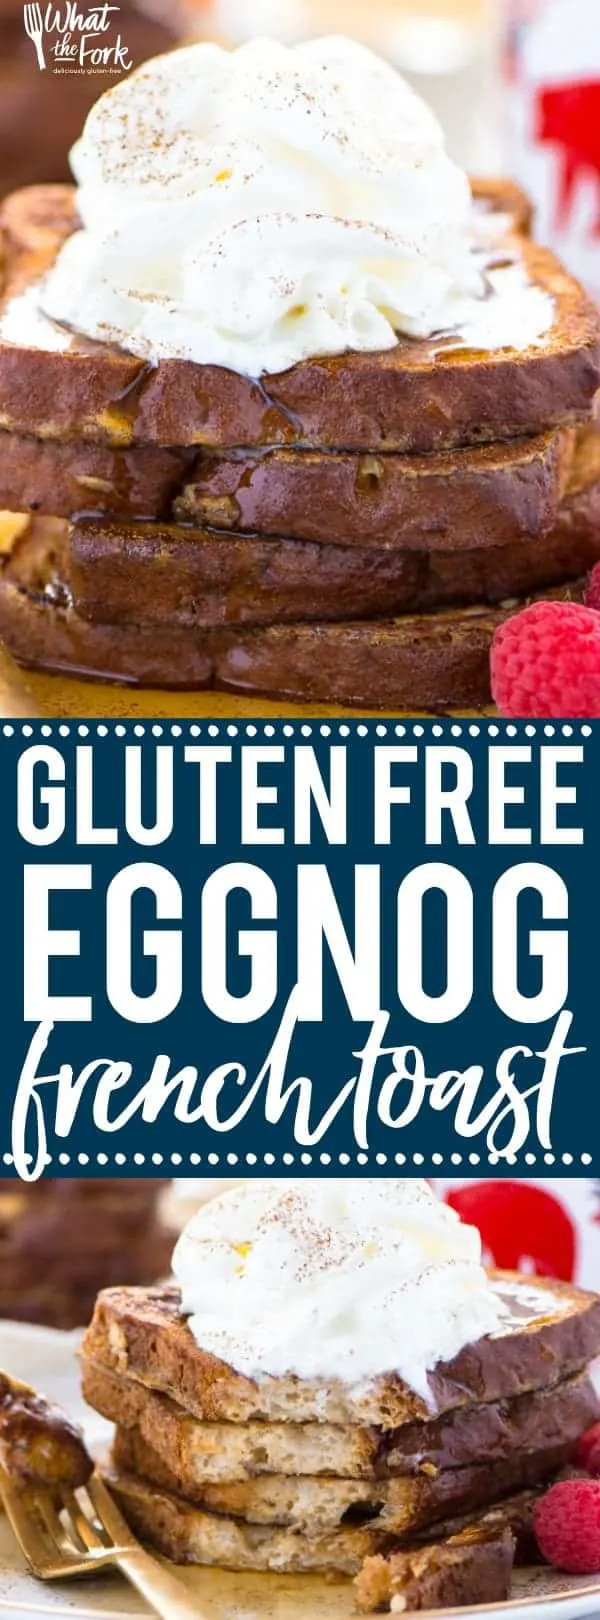 This Gluten Free Eggnog French Toast is the perfect breakfast during the holiday season. You can make it ahead too and reheat it for your holiday brunch! For dairy free, use non-dairy eggnog. Recipe from @whattheforkblog | whattheforkfoodblog.com | recipes for Christmas brunch | gluten free breakfast recipes | easy French toast recipes | #Christmas #frenchtoast #breakfast #glutenfree #easyrecipes #recipe #eggnog #brunch